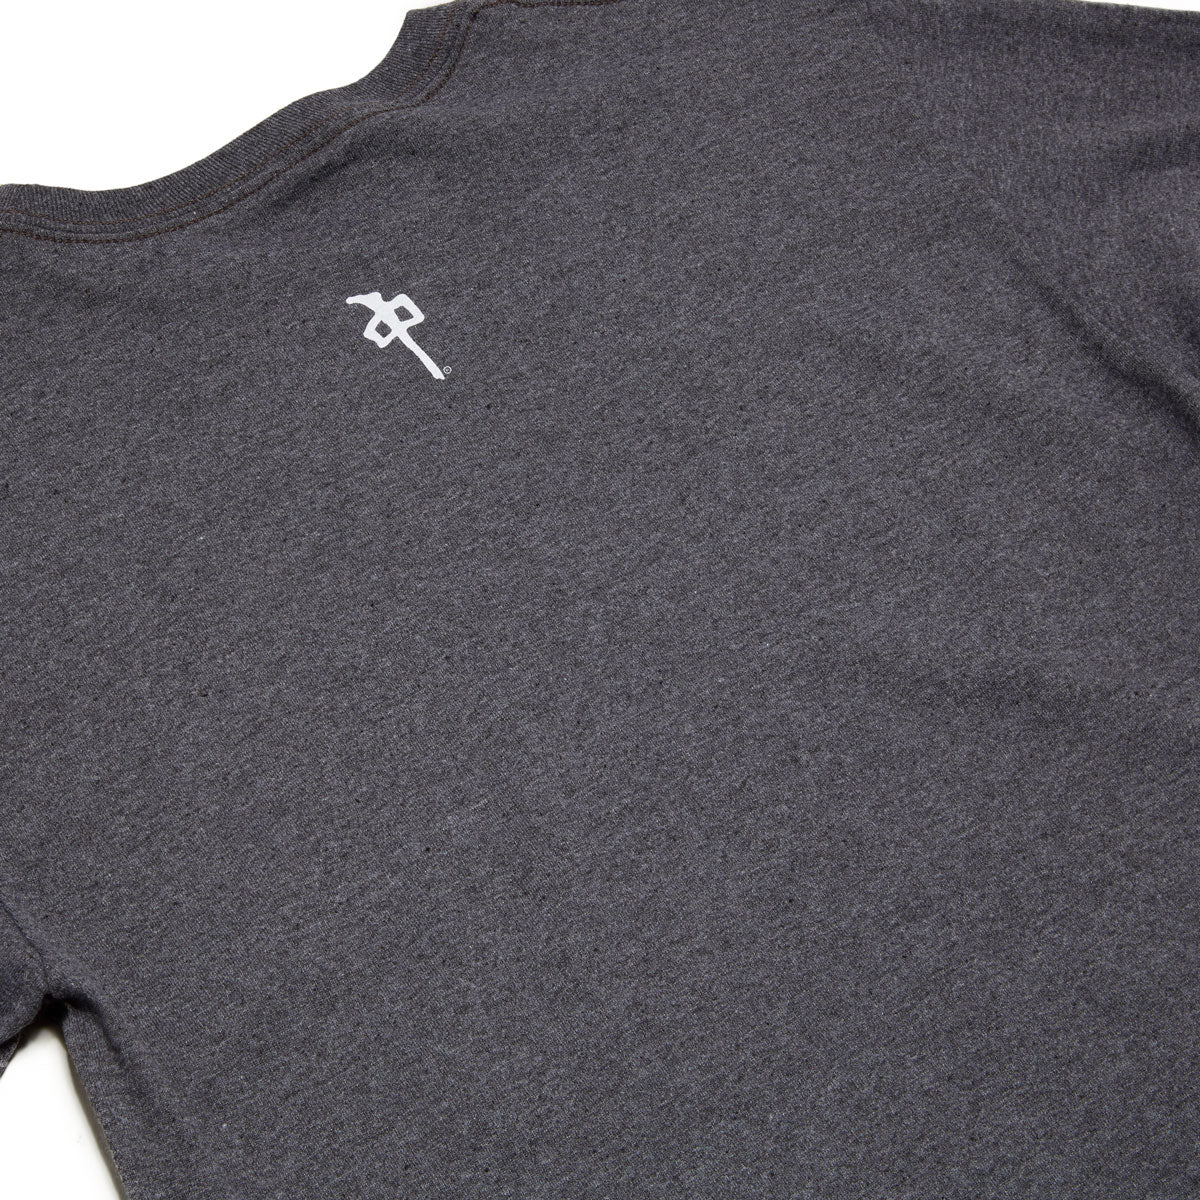 RDS Chung Axe Long Sleeve T-Shirt - Charcoal Heather image 2